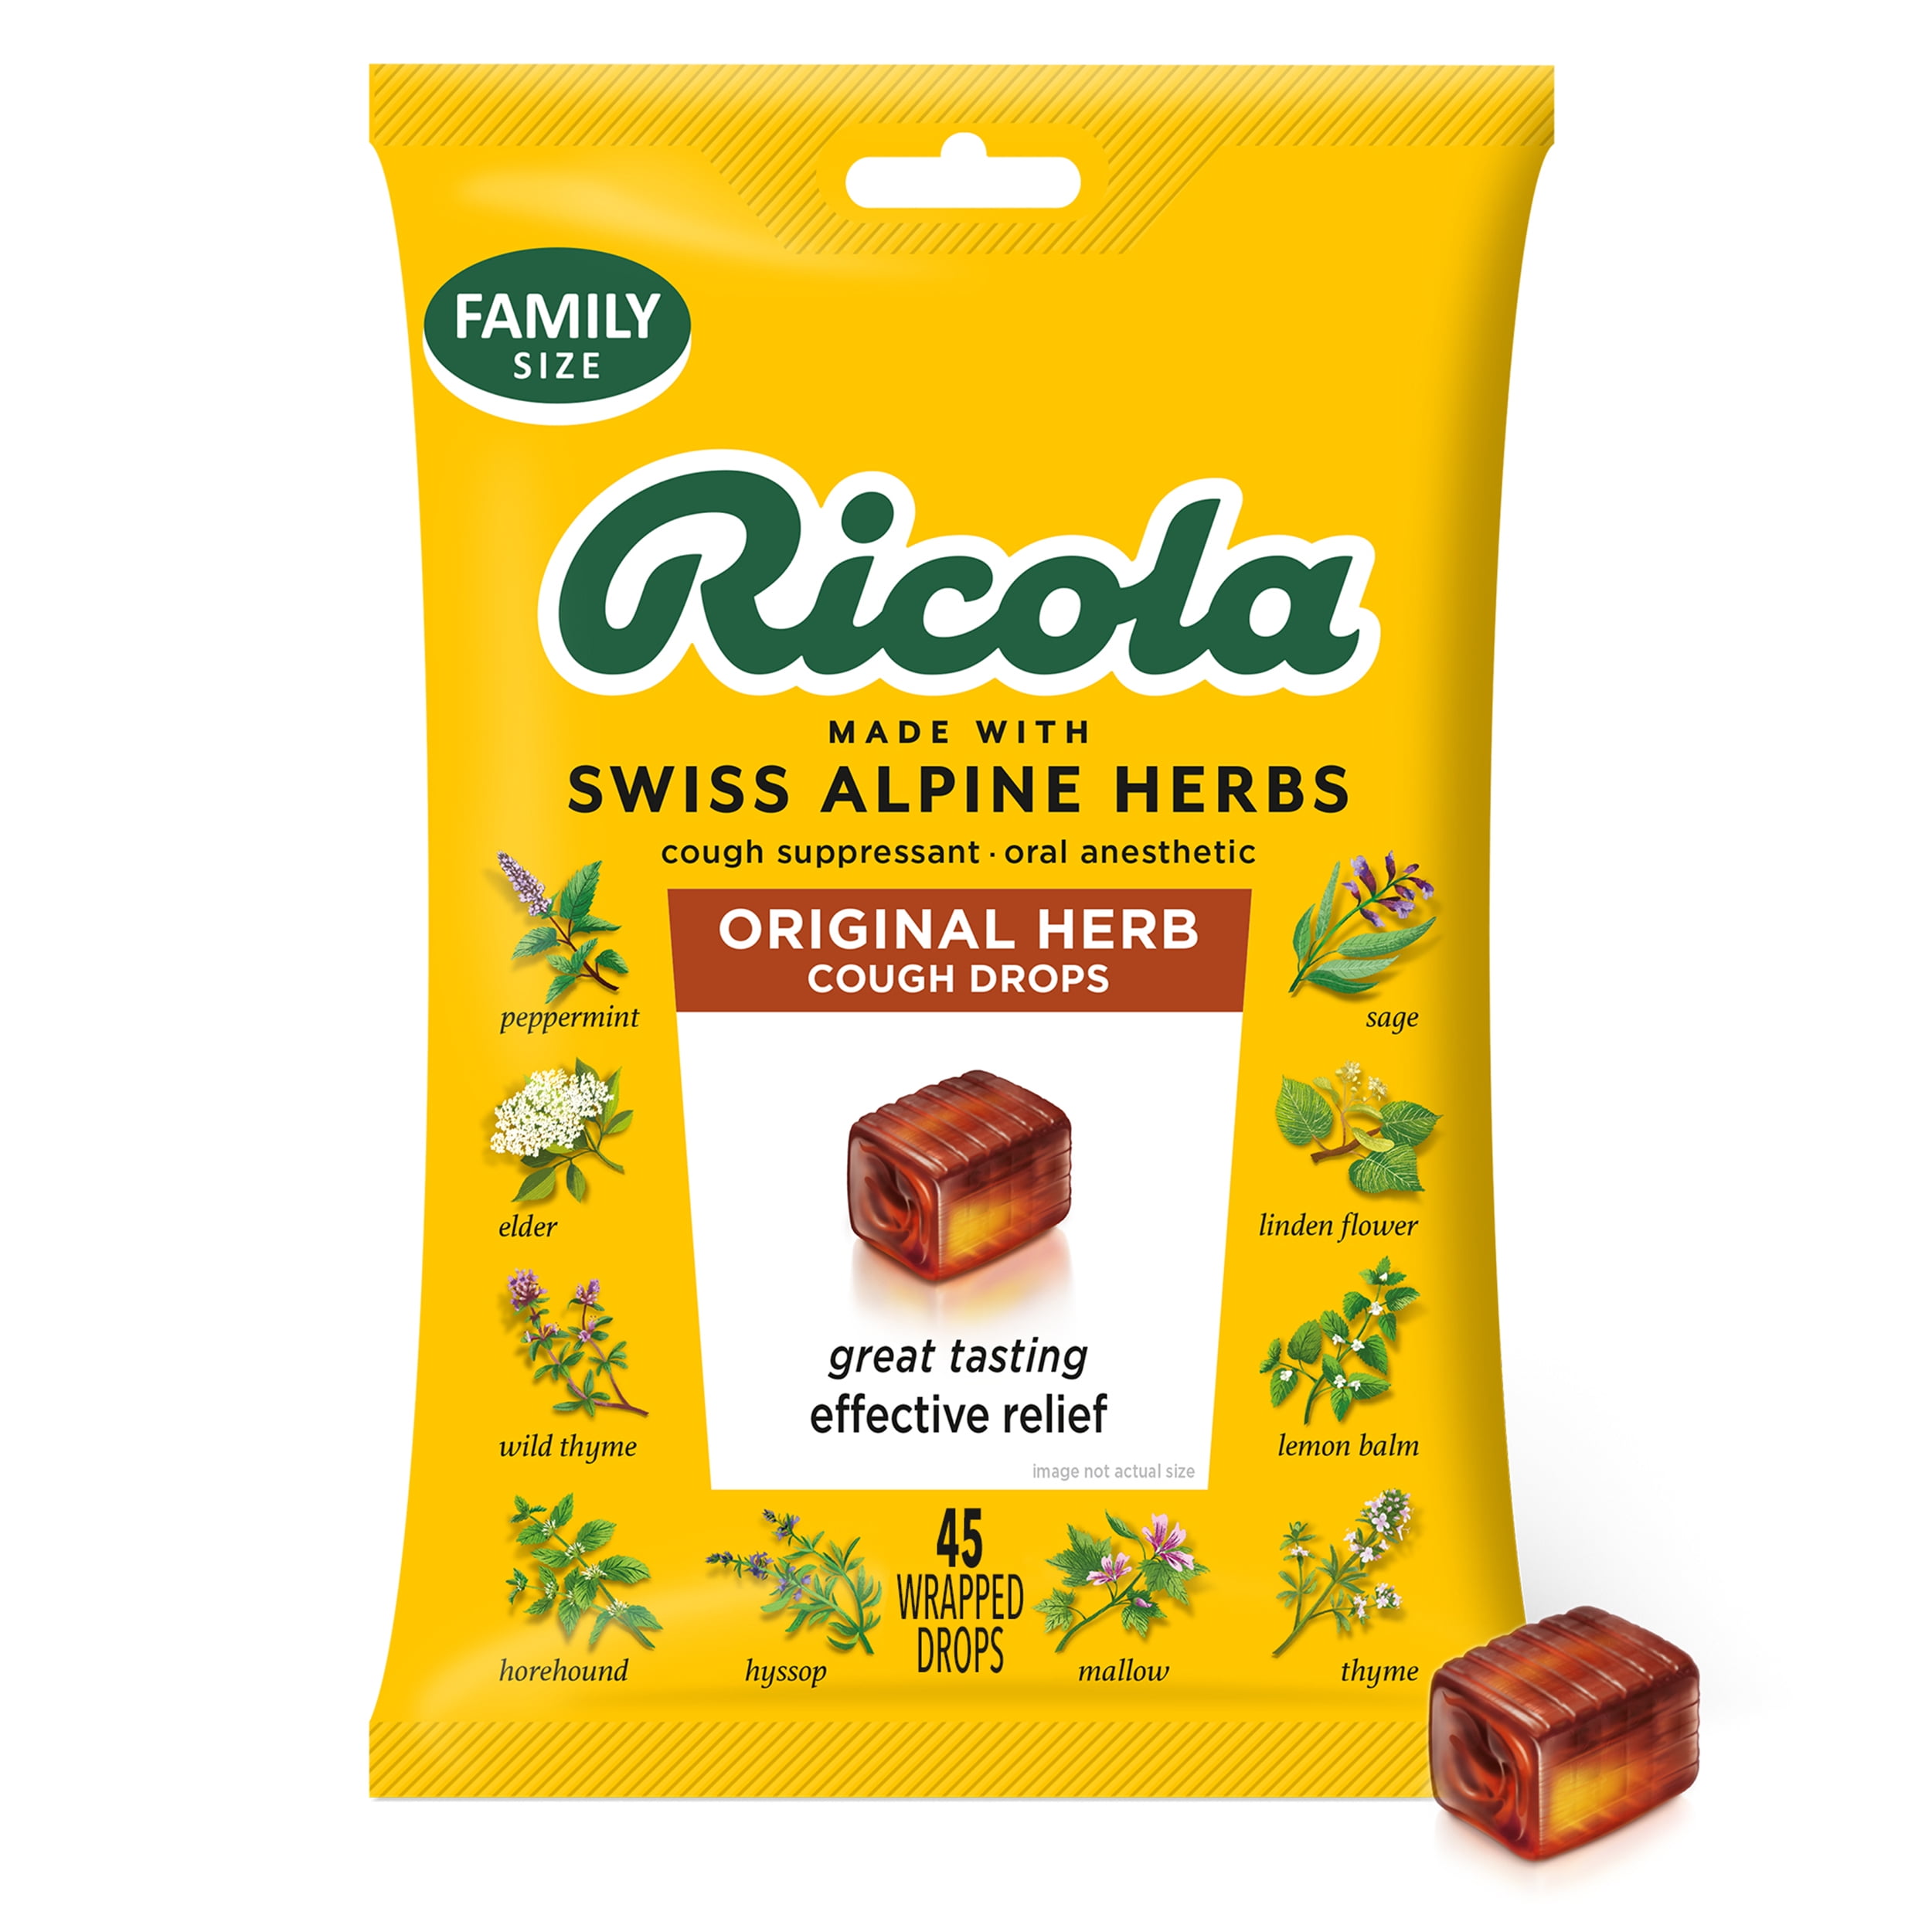 Ricola Cough Drops, Soothing Relief for Dry, Sore Throat, Original Herb, 45 Count